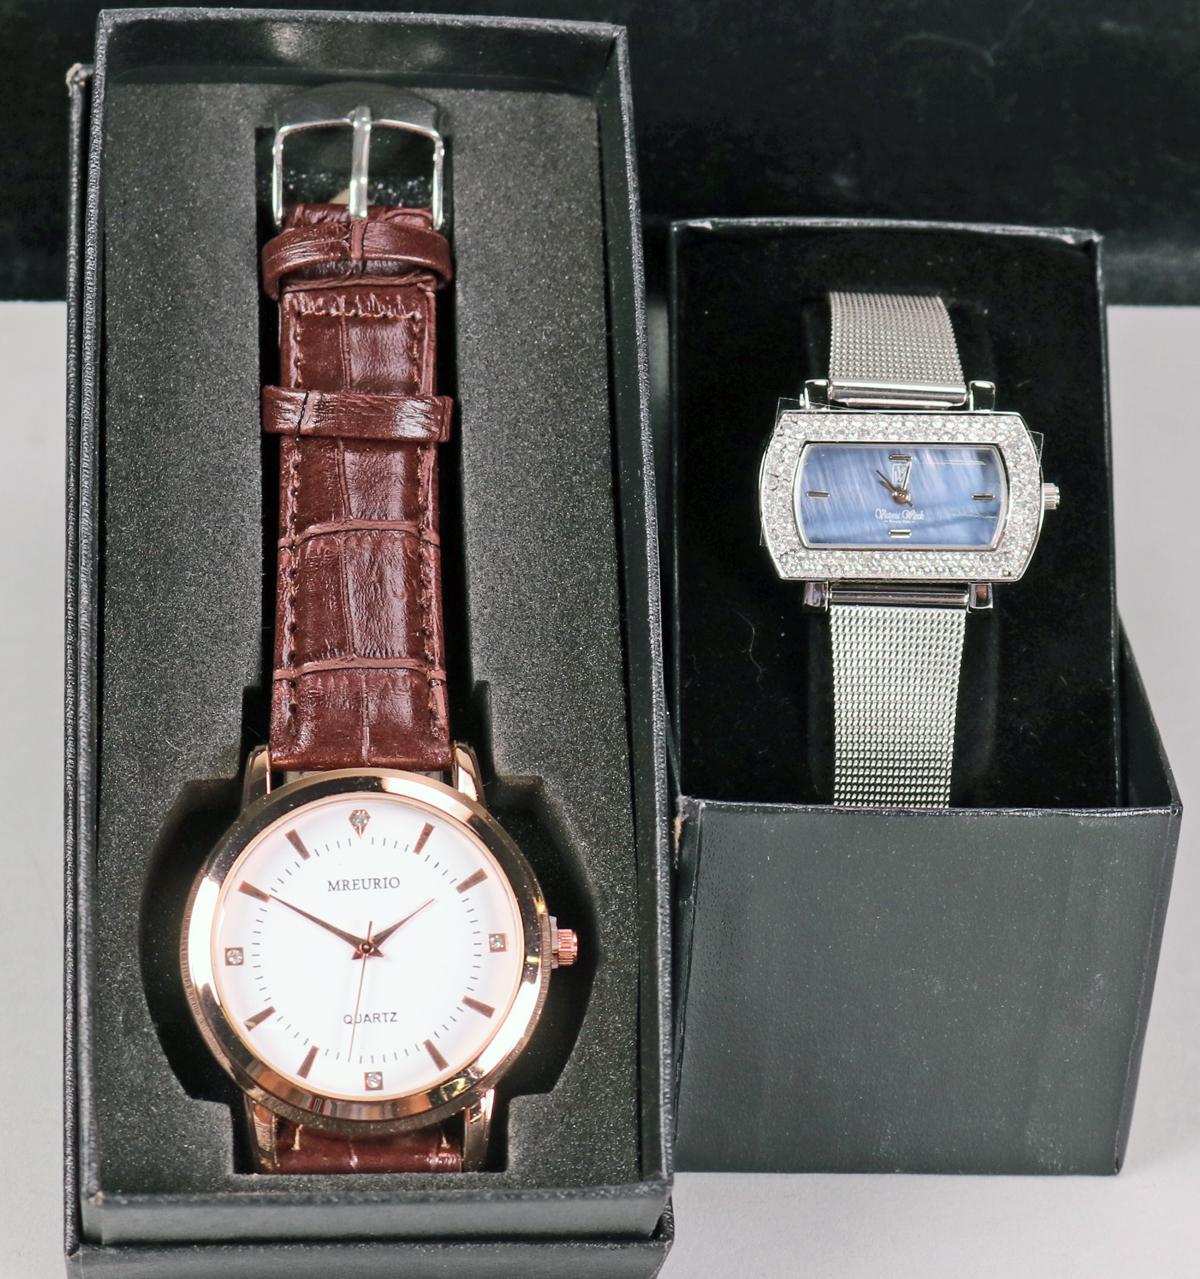 Charity Item - His & Hers Quartz Watches